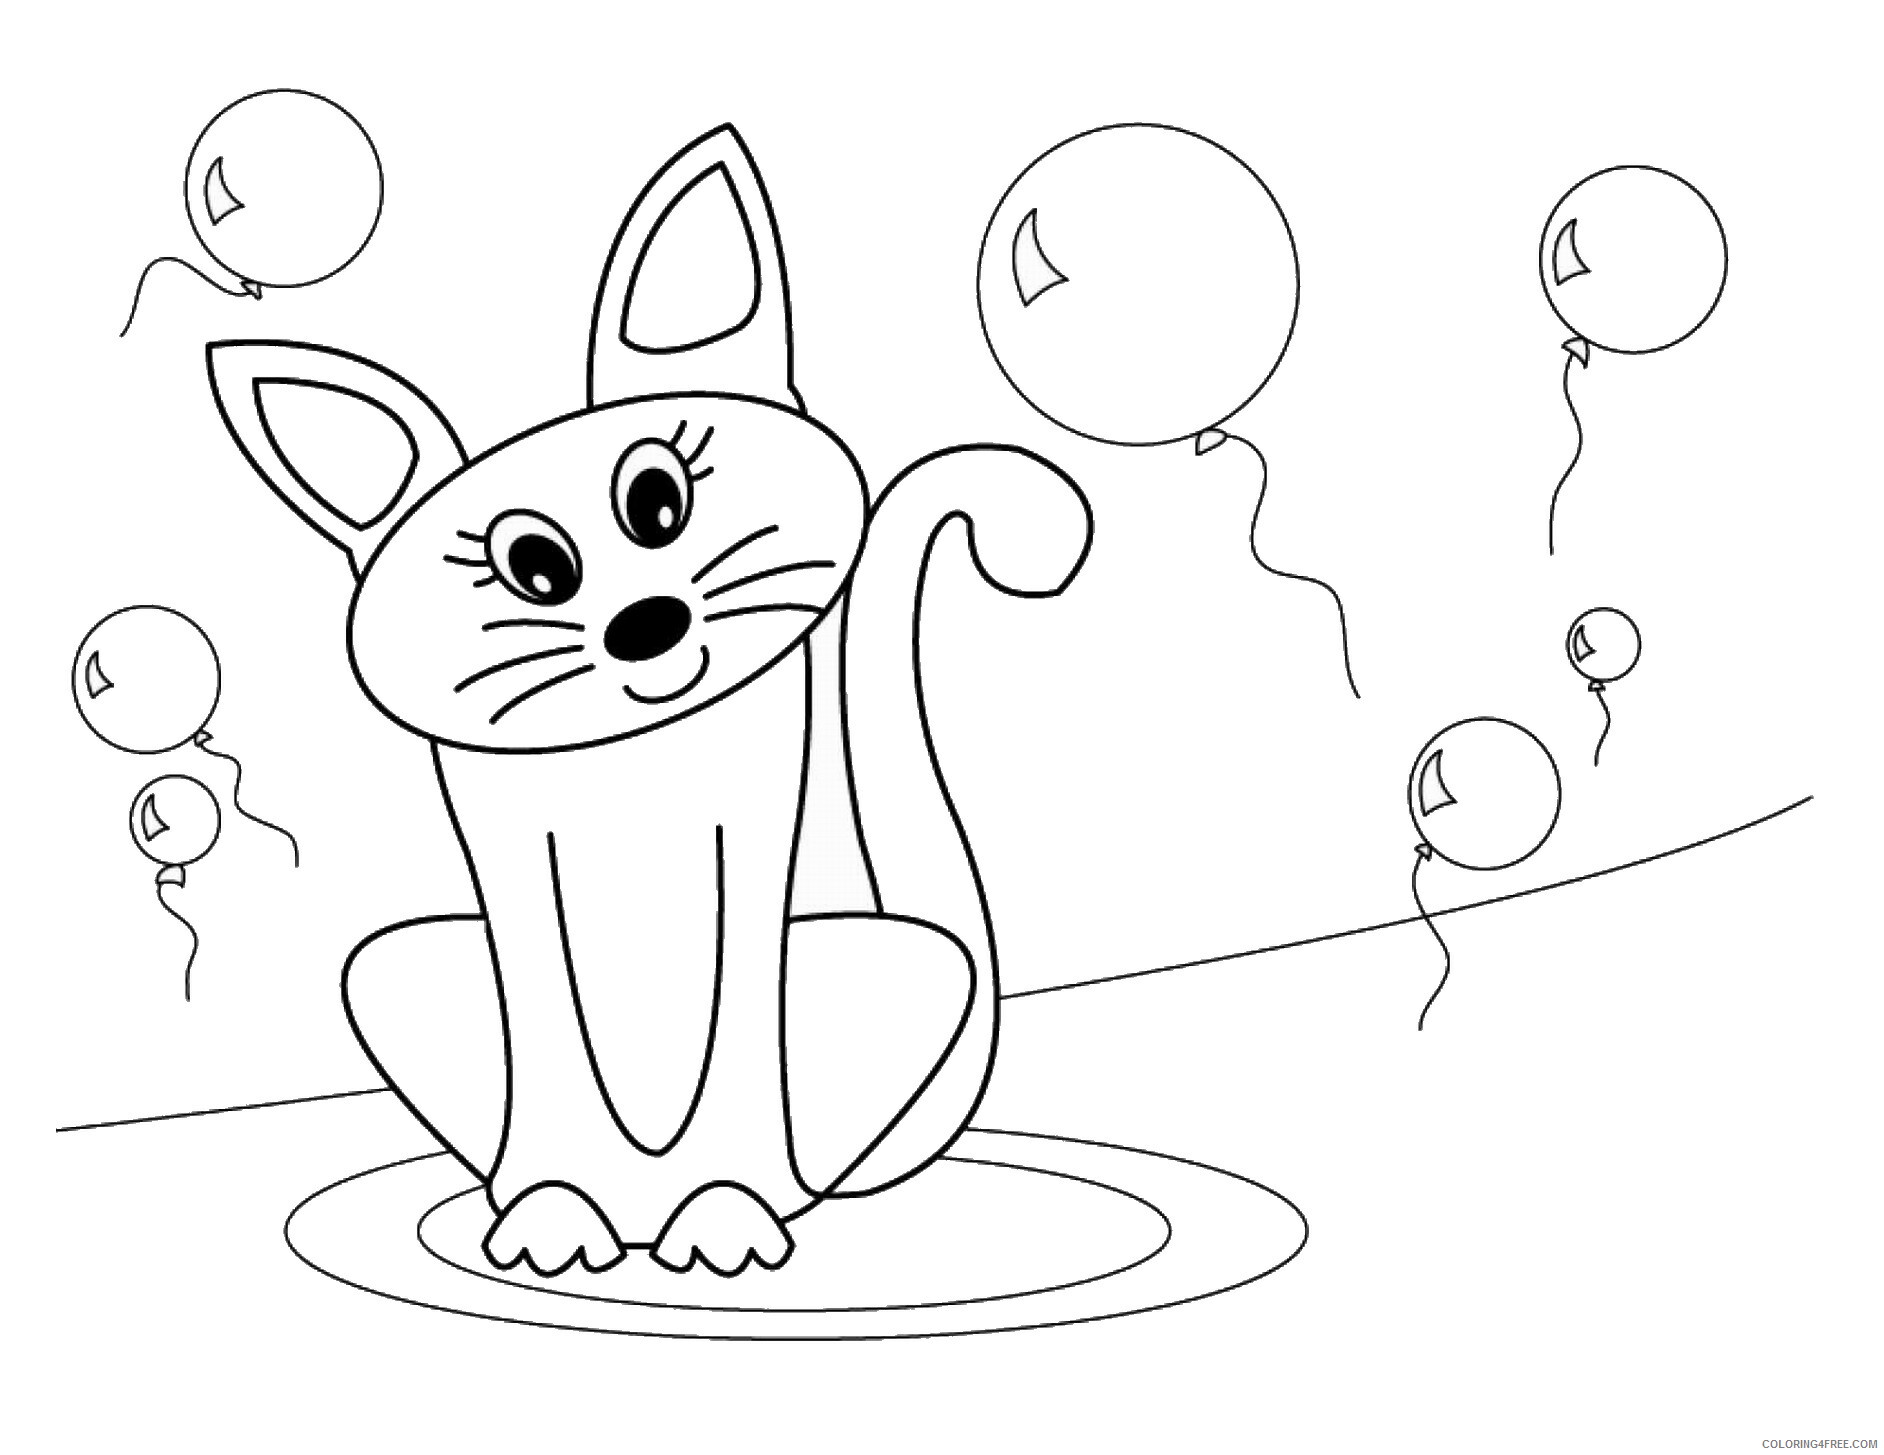 Cat Coloring Pages Animal Printable Sheets cats_31 2021 0825 Coloring4free